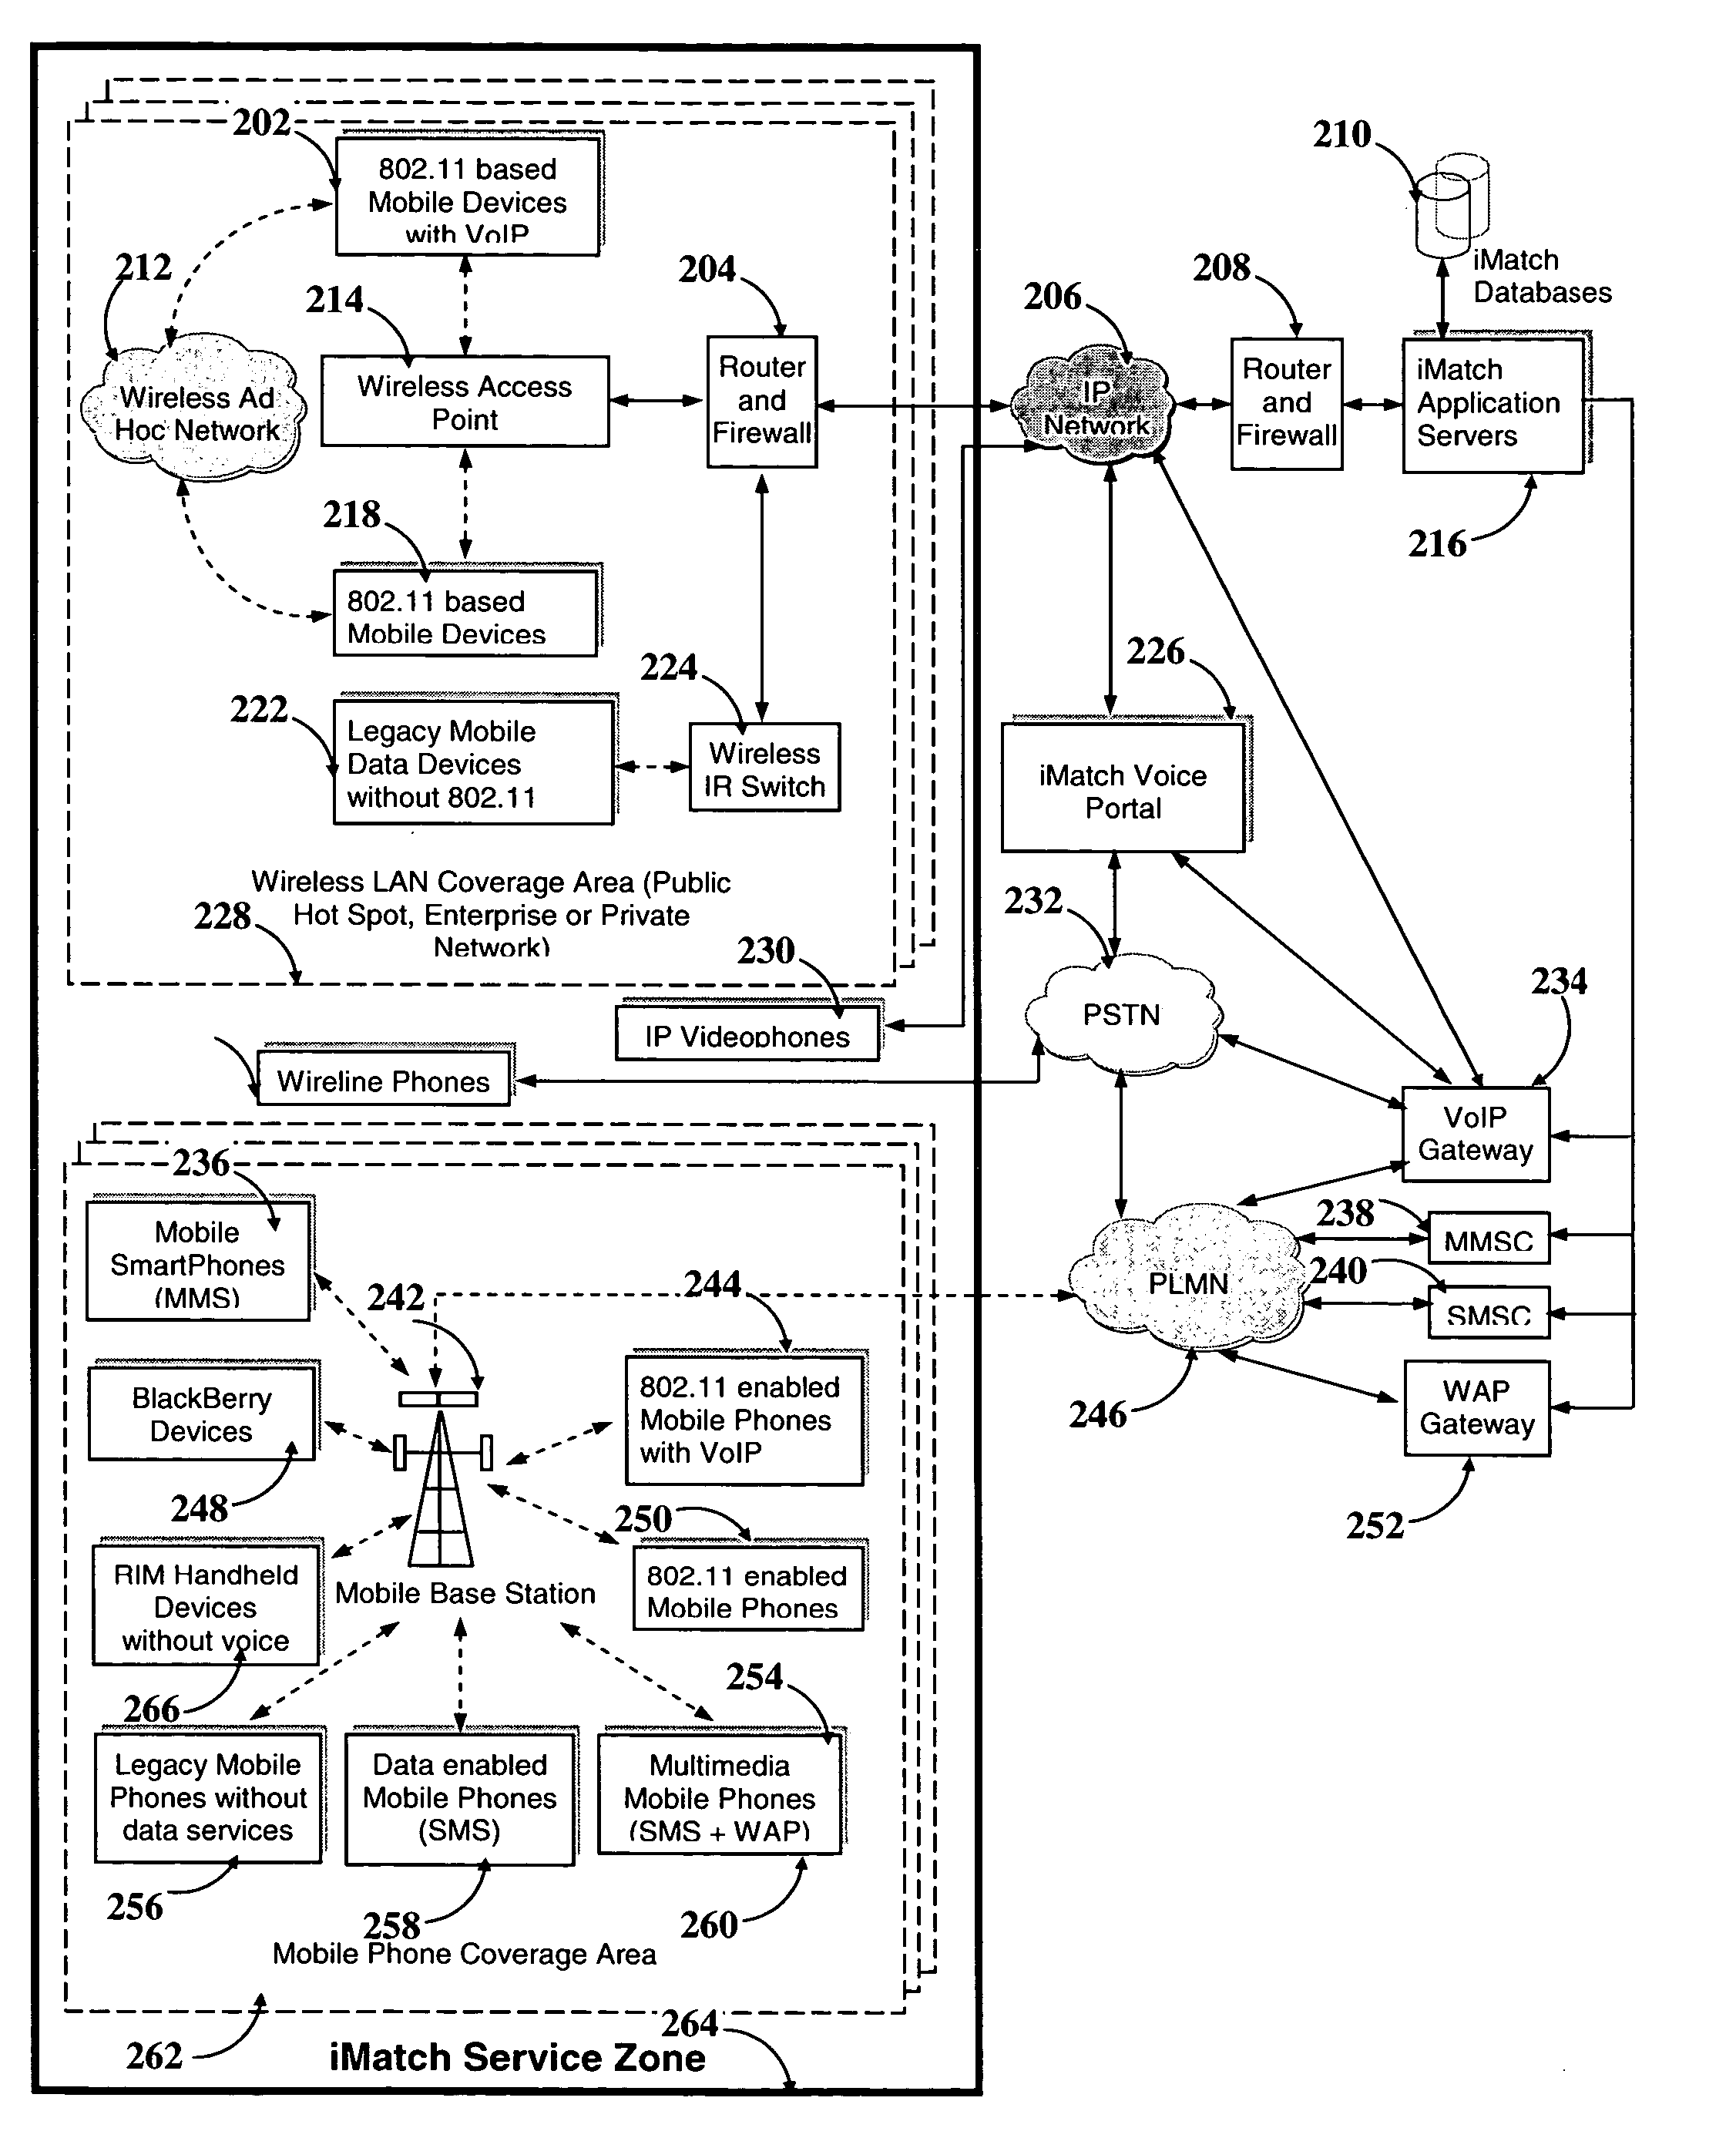 System and method for instant match based on location, presence, personalization and communication